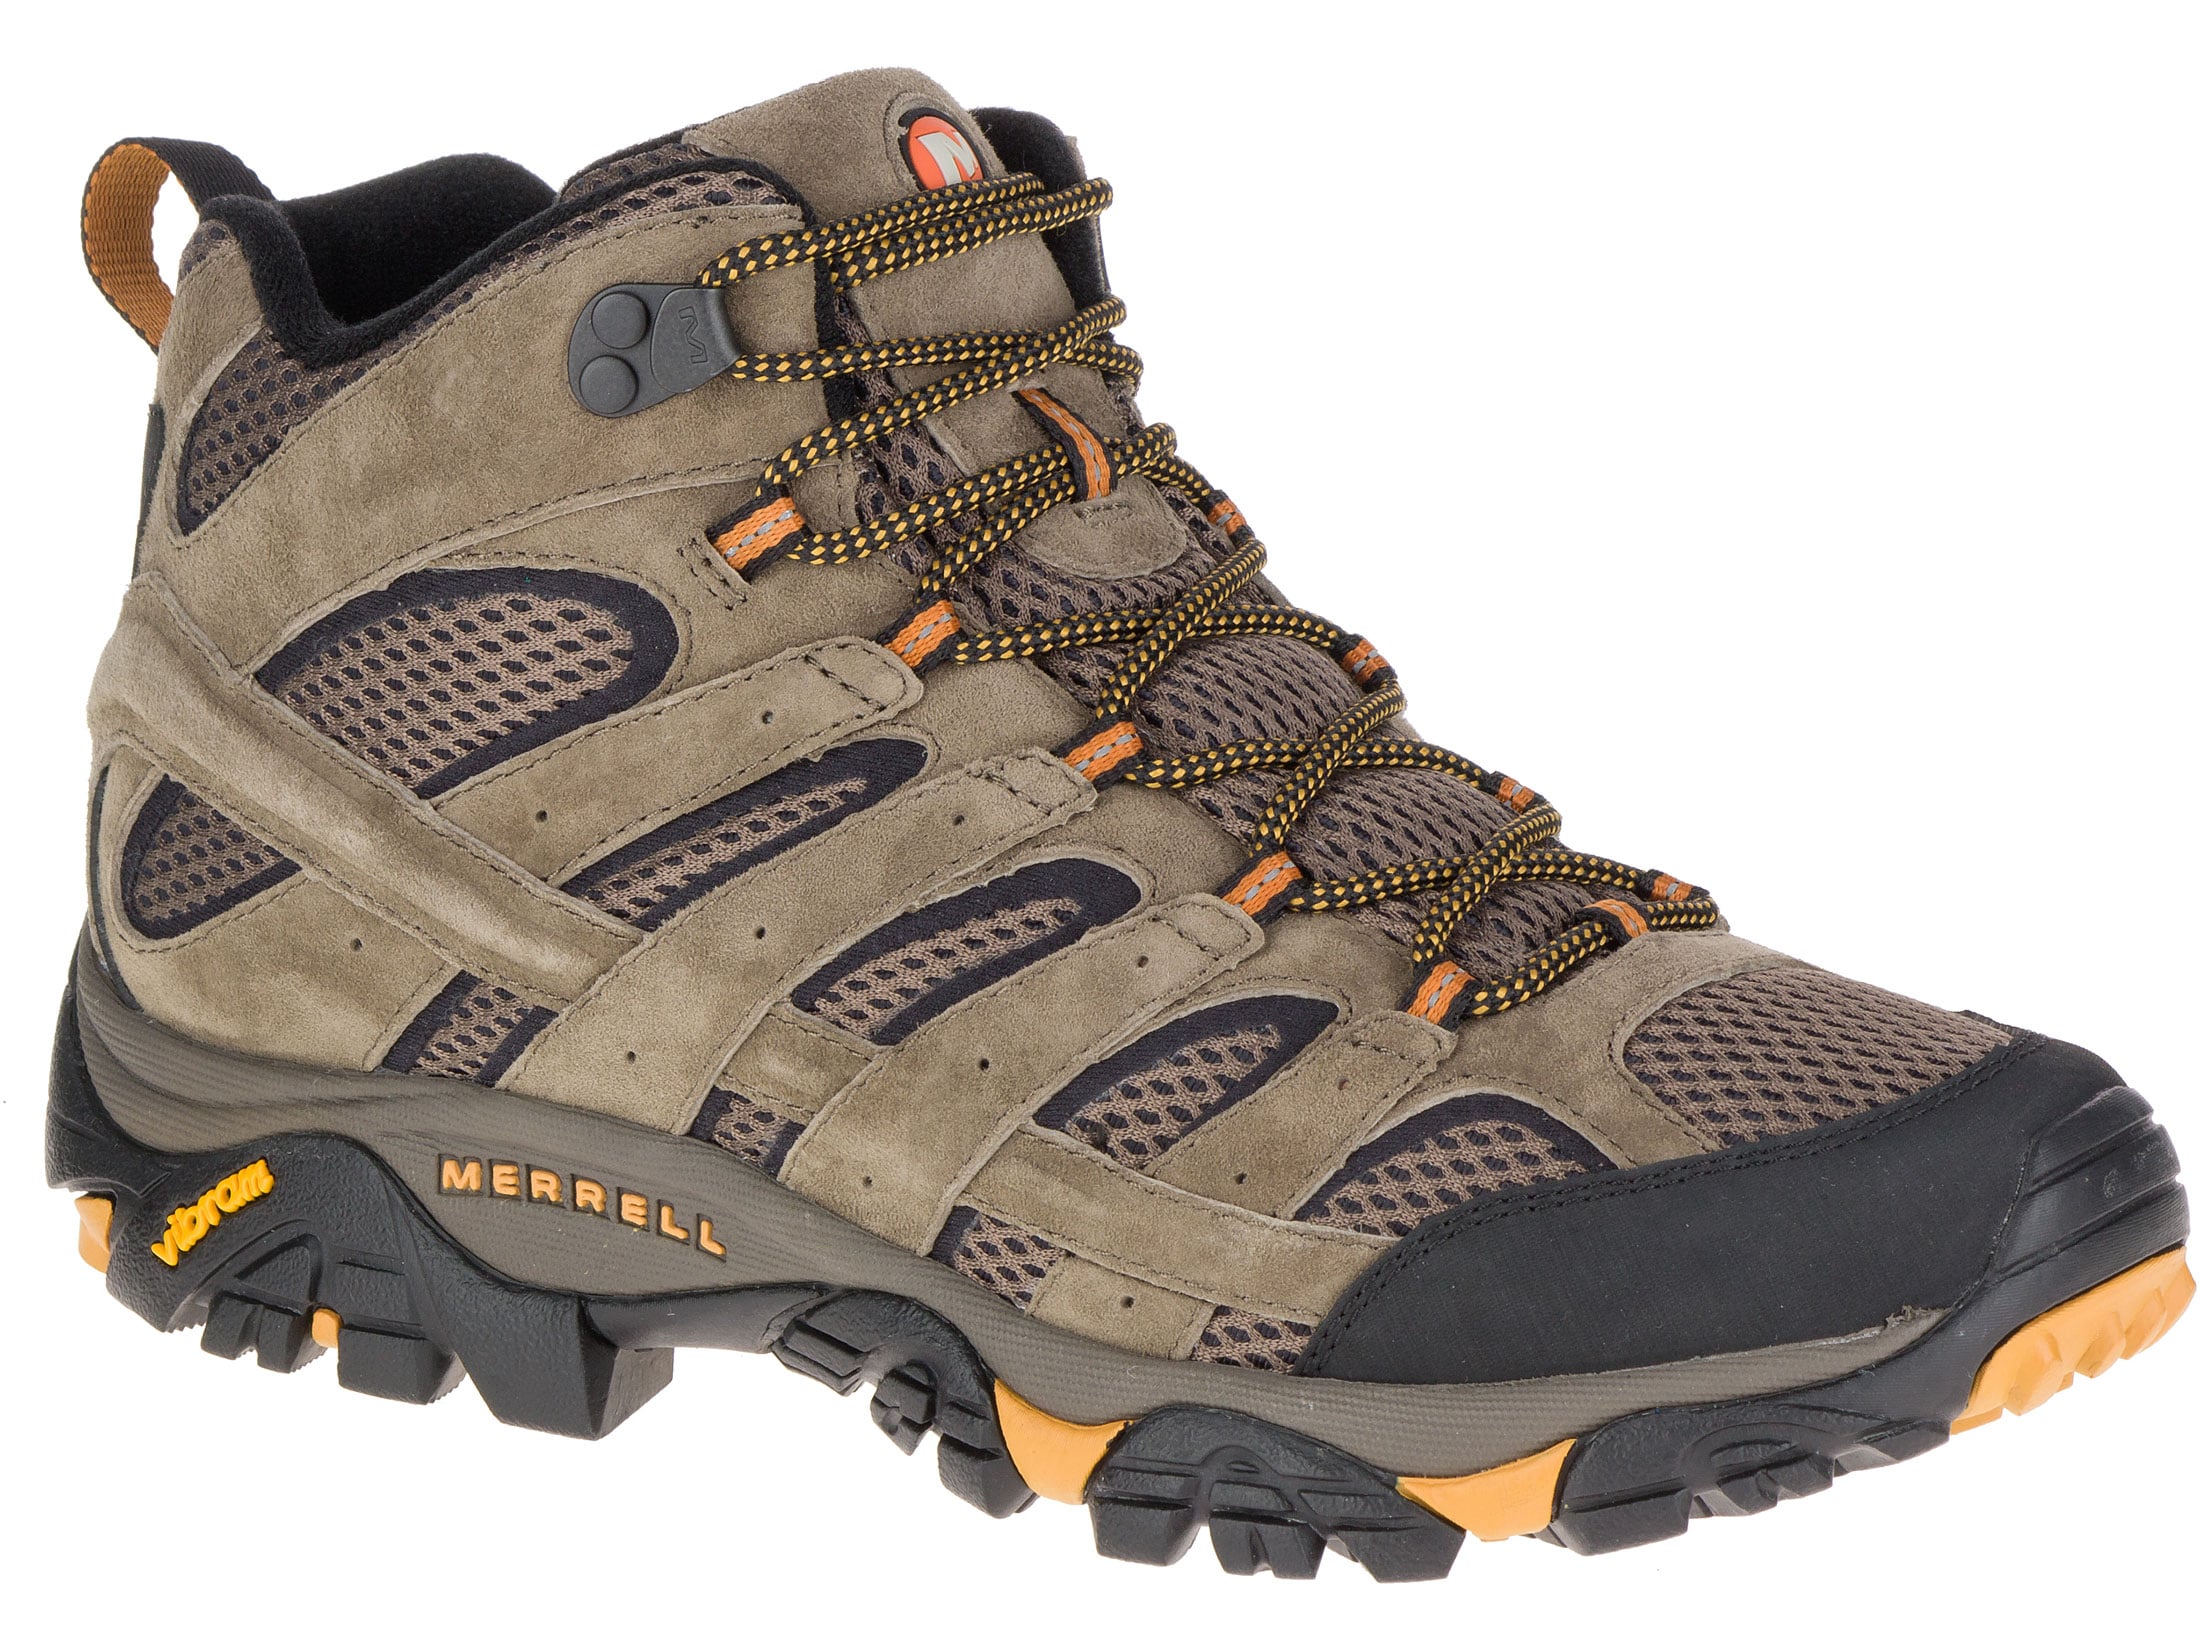 Merrell Moab 2 Vent Mid 5 Hiking Boots Leather/Synthetic Walnut Men's